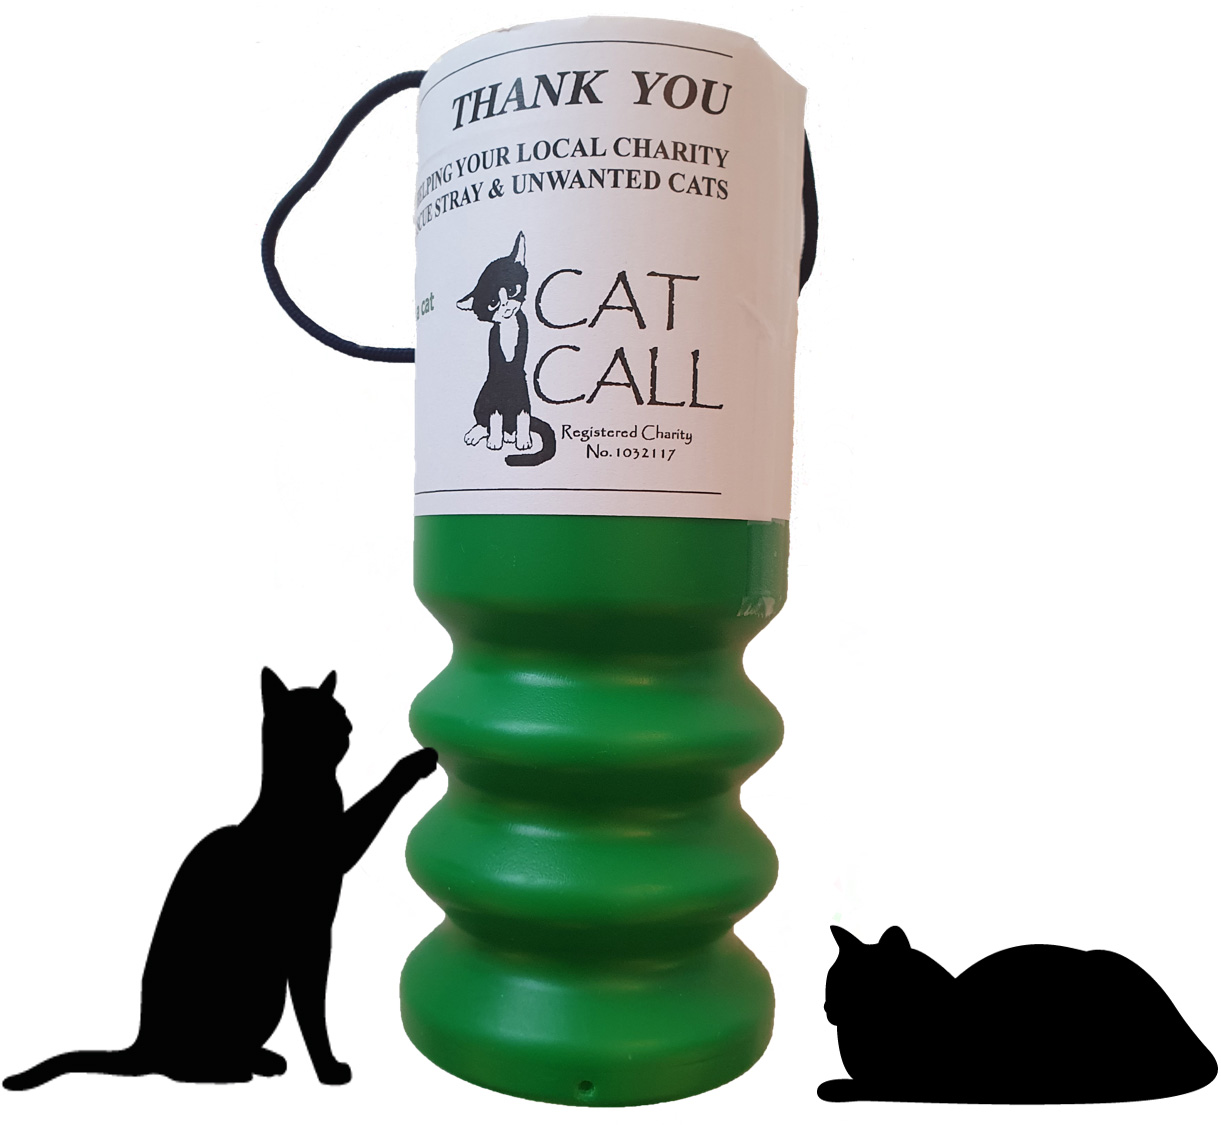 CAll us to receive a Cat Call collecting pot